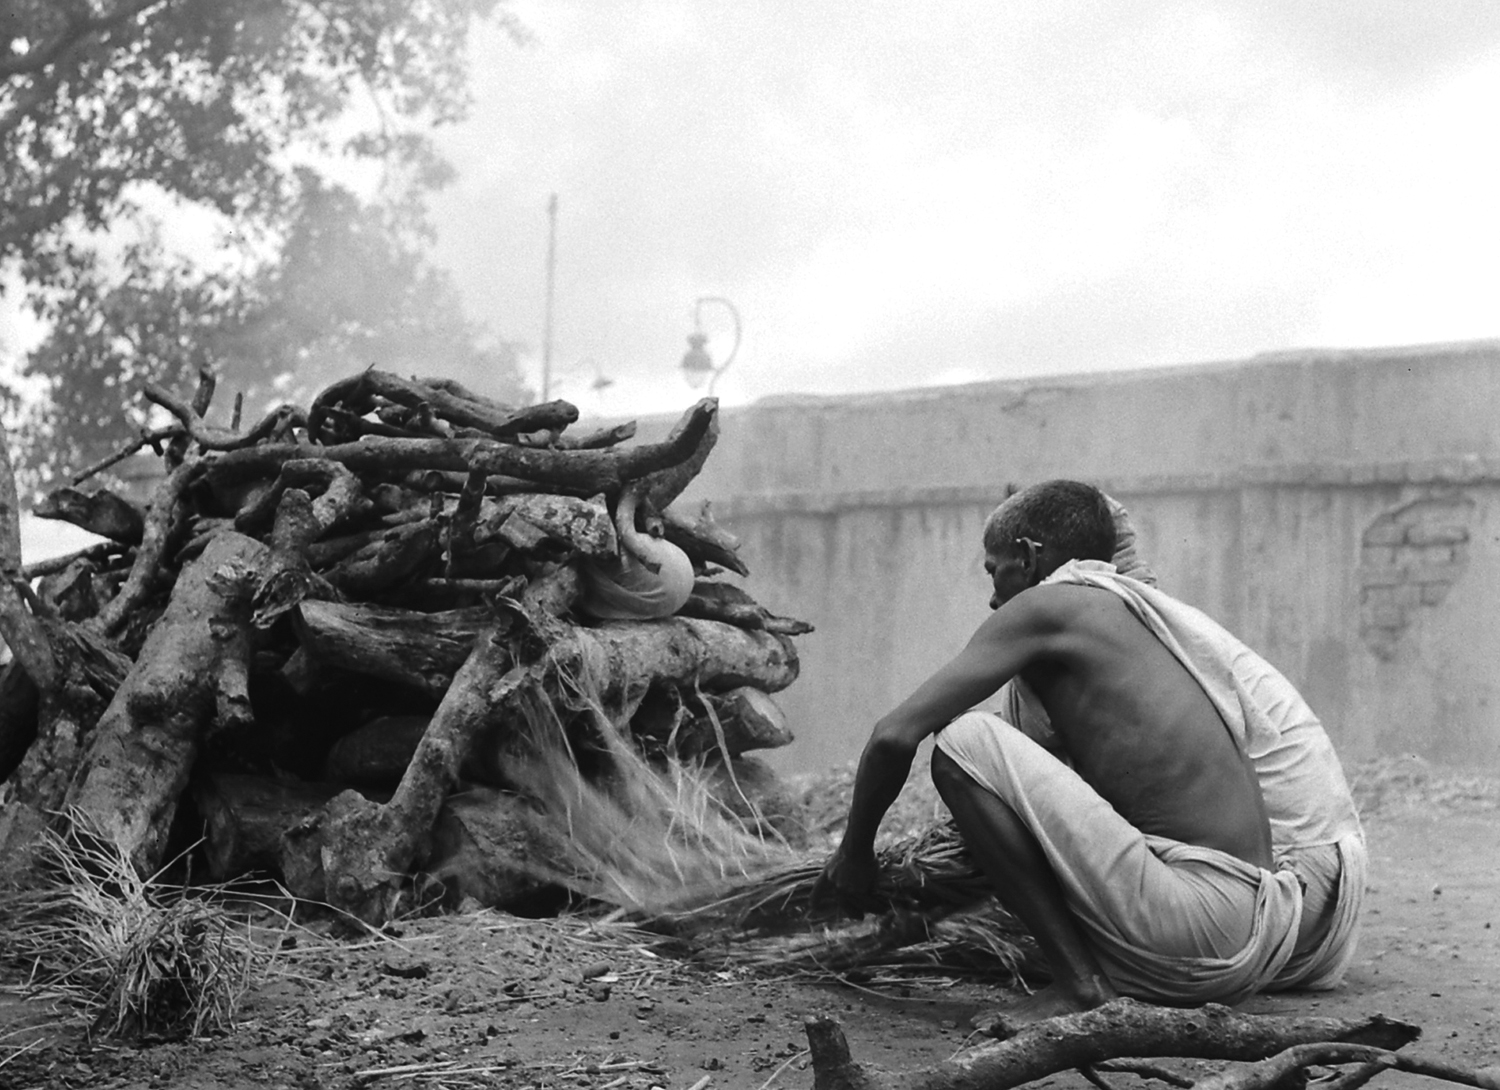 Aftermath of August 1946 Calcutta religious riots; tending a pyre for the dead.